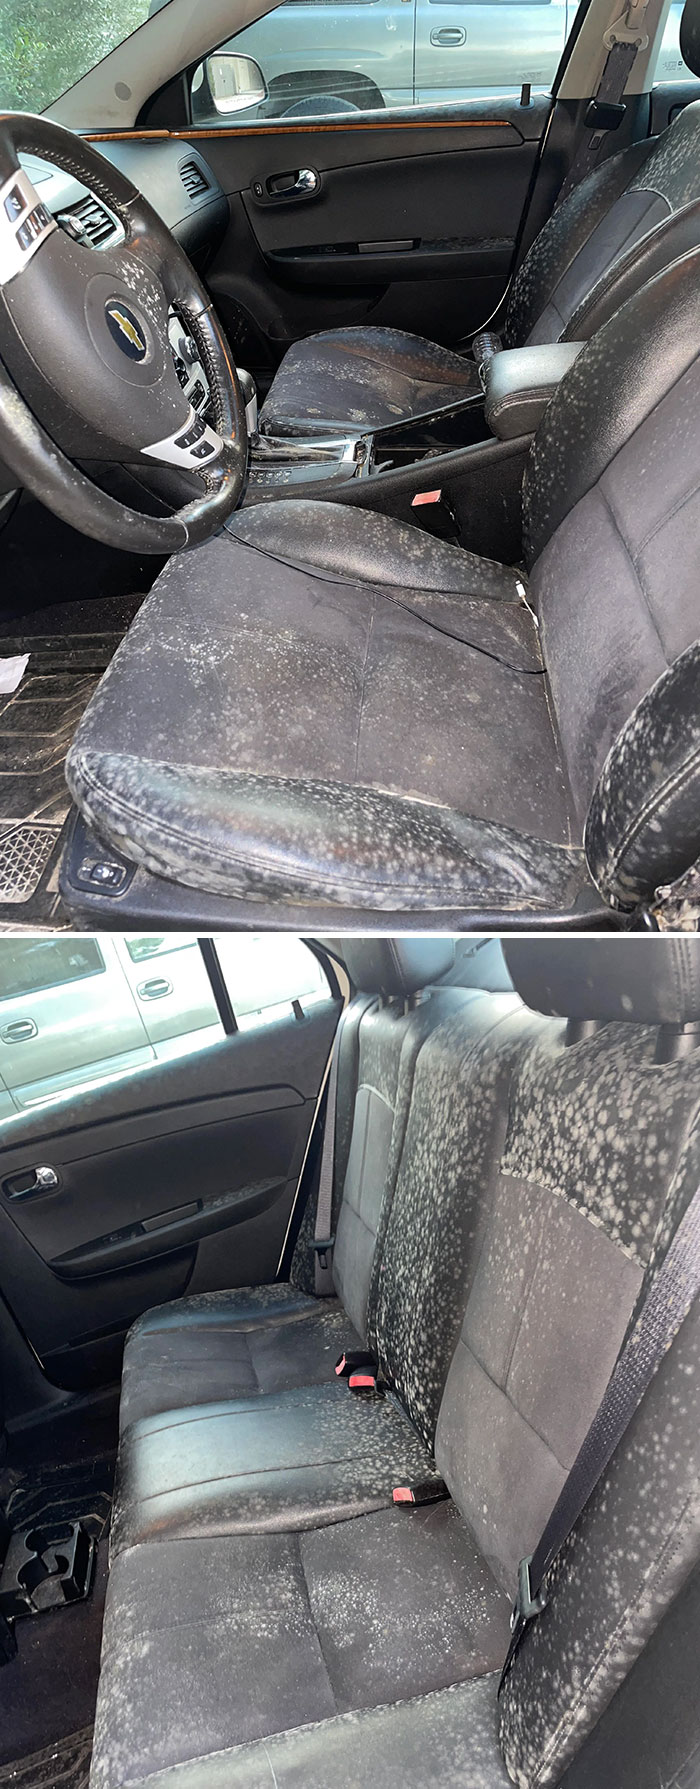 Left My Car Sitting At Work For A Little Over A Month. Went To Go Pick It Up Today And The Interior Is Covered In Mold. FML